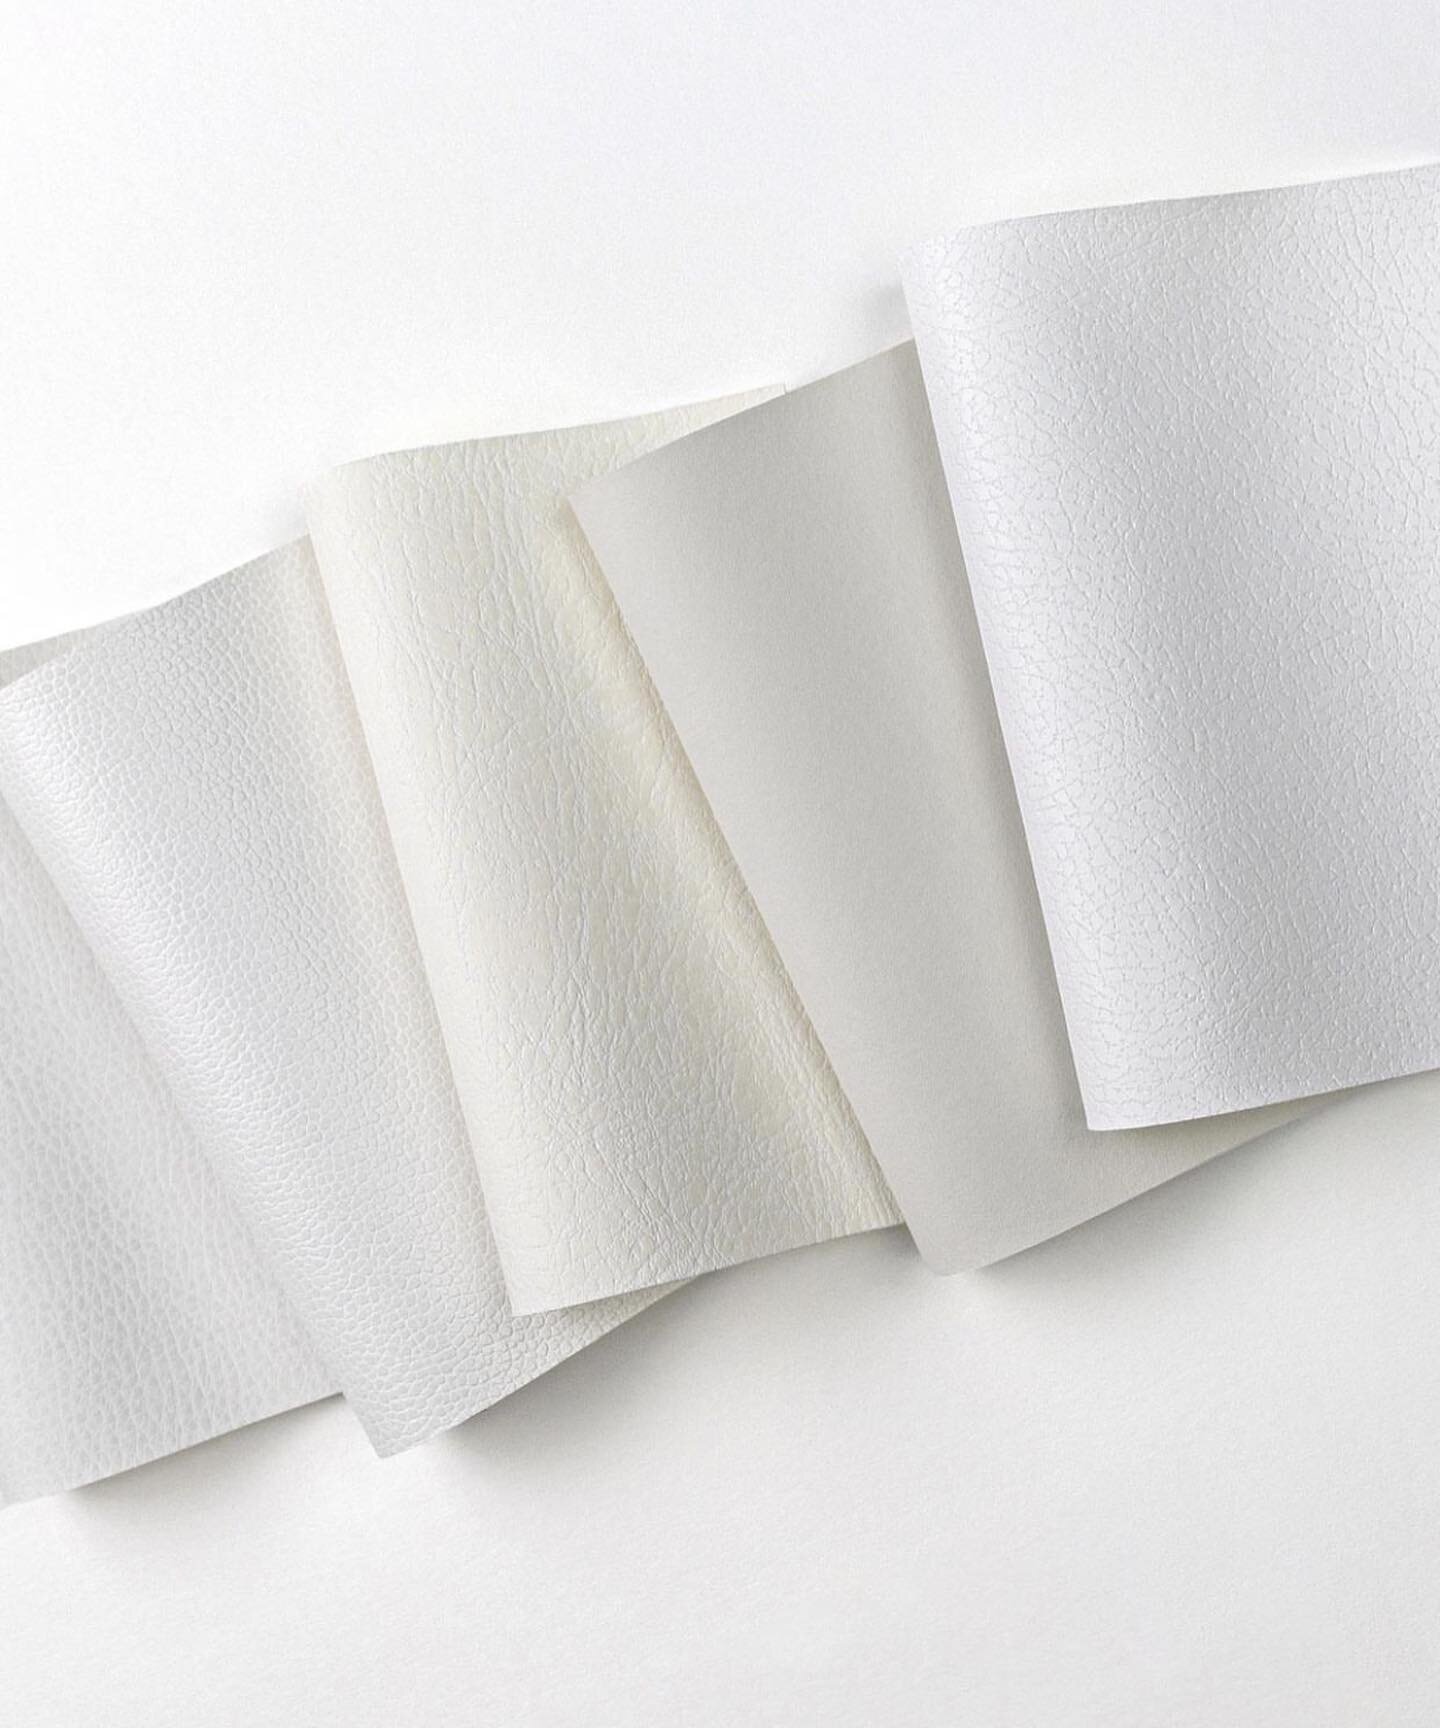 With other shades of white, such as creamy Coconut and foggy Steam, Brisa White creates a harmonious freshness that celebrates the calm beauty of white.

Contact us to request samples!

Whitney Evans, Ltd. 
Located at the @denverdesigndistrict
595 S.